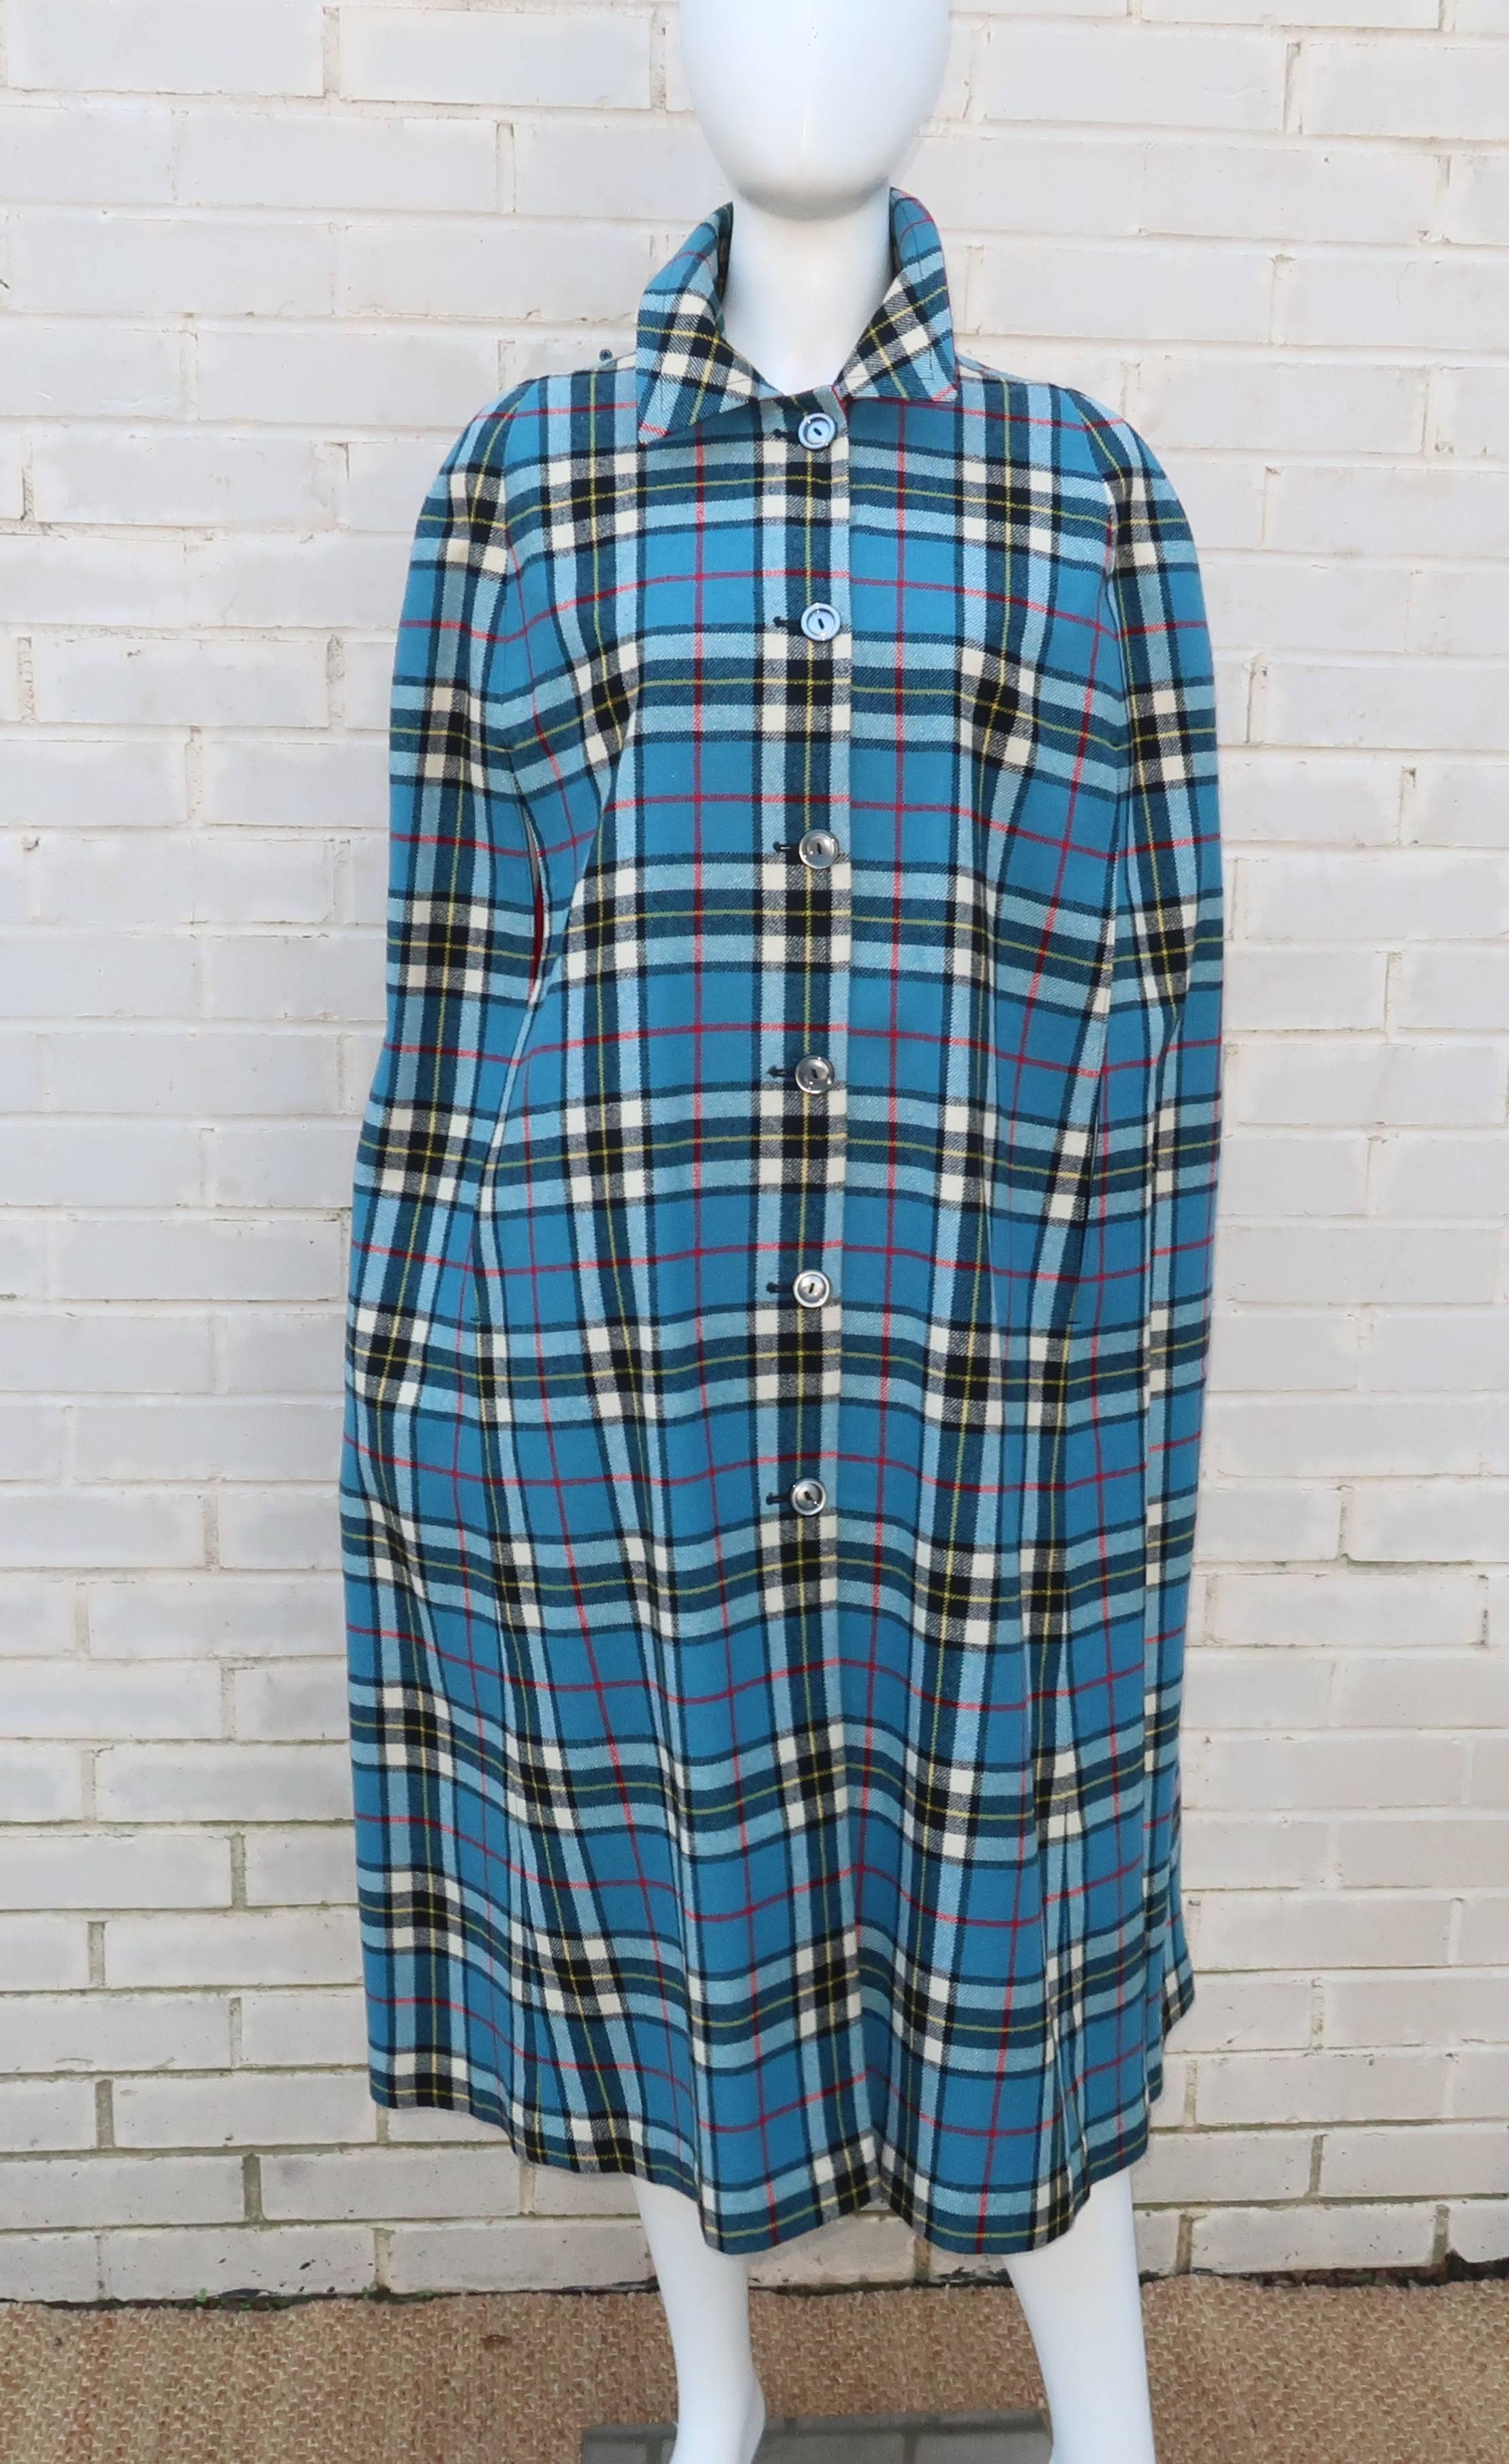 Two for the price of one!  This adorable 1960's cape is fully reversible for wear as a plaid wool topper or make a quick change to a red canvas wrap.  The plaid is a vibrant combination of cerulean blue mixed with white, red and black and really